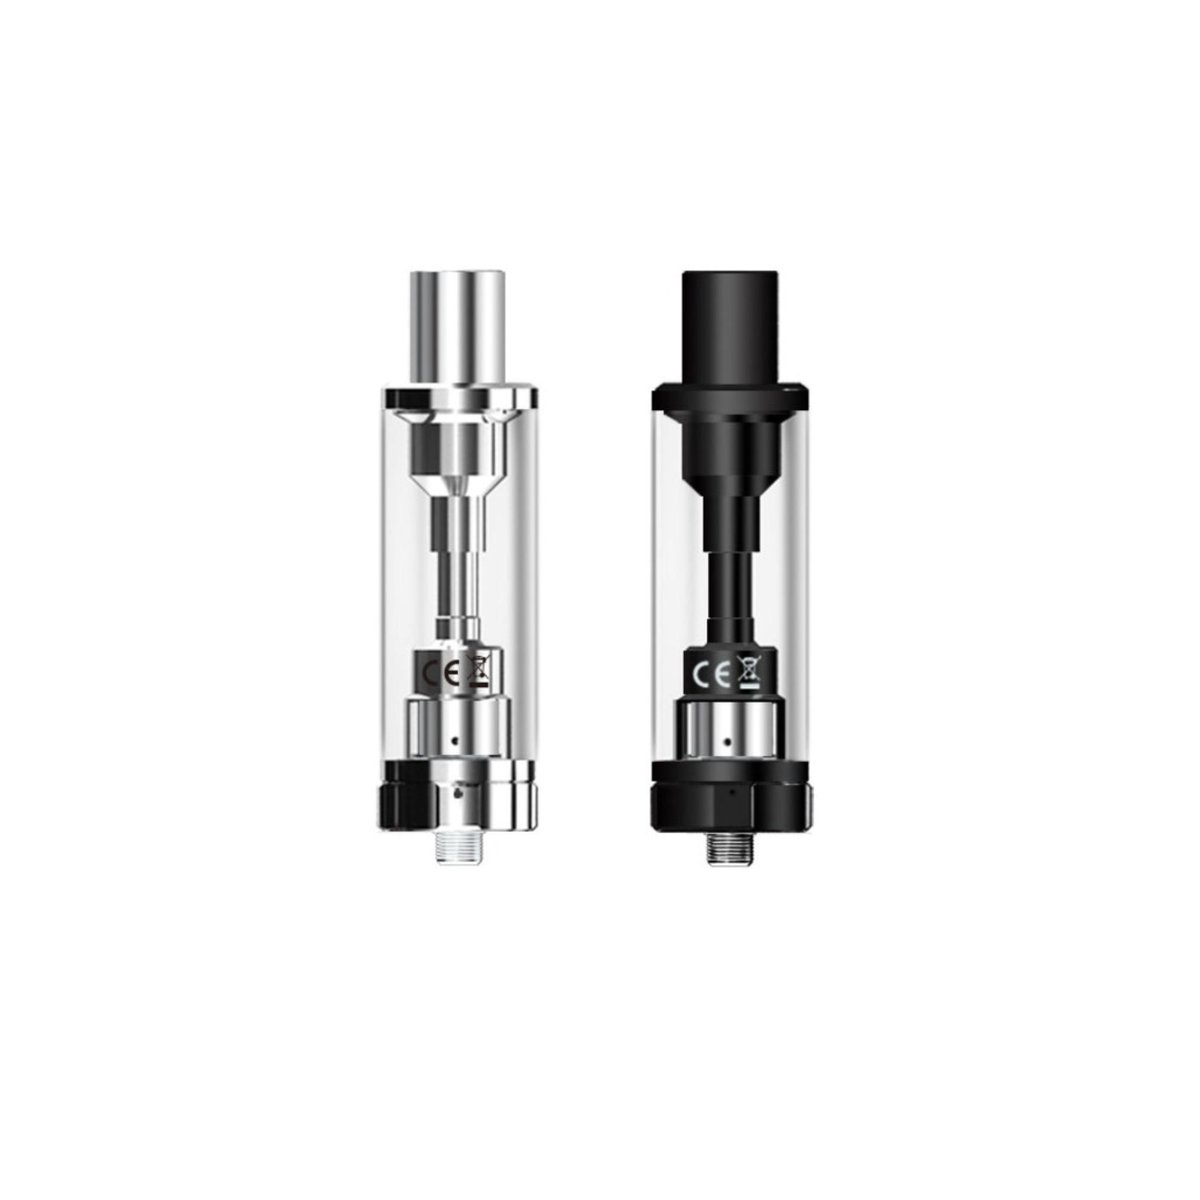 Just added the @aspireecig (Aspire Ecigs) K2 tank to our site! 

Product Link: ow.ly/BVK550zBP3v

#aspire #aspireecig #aspirek2 #ecig #ecigs #ecigarette #ecigarettes #ecigg #ecigcity #ecigcity4 #ecigcityhouston #ecigcitynoho #ecigcitymonrovia #ecigcitylb #ecigcity6